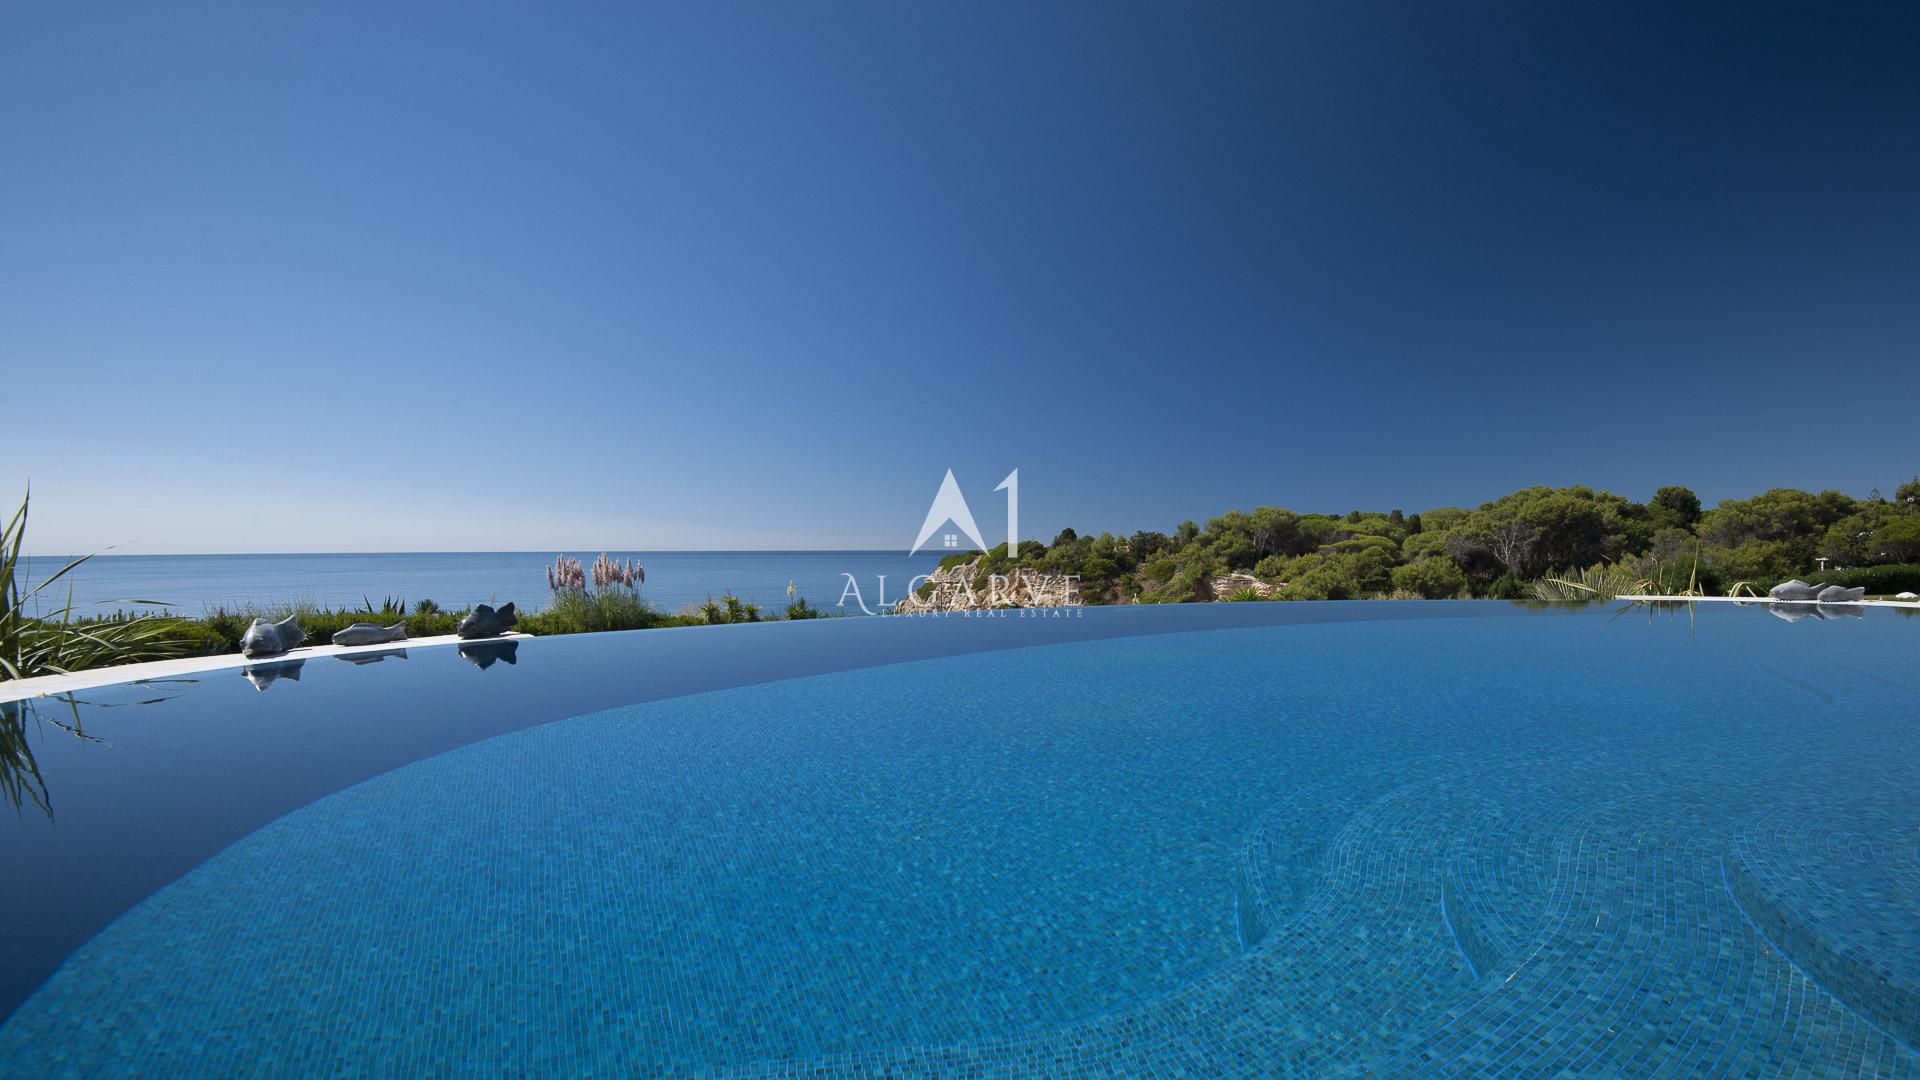 DREAM HOLIDAYS IN A STUNNING SETTING IN THE ALGARVE